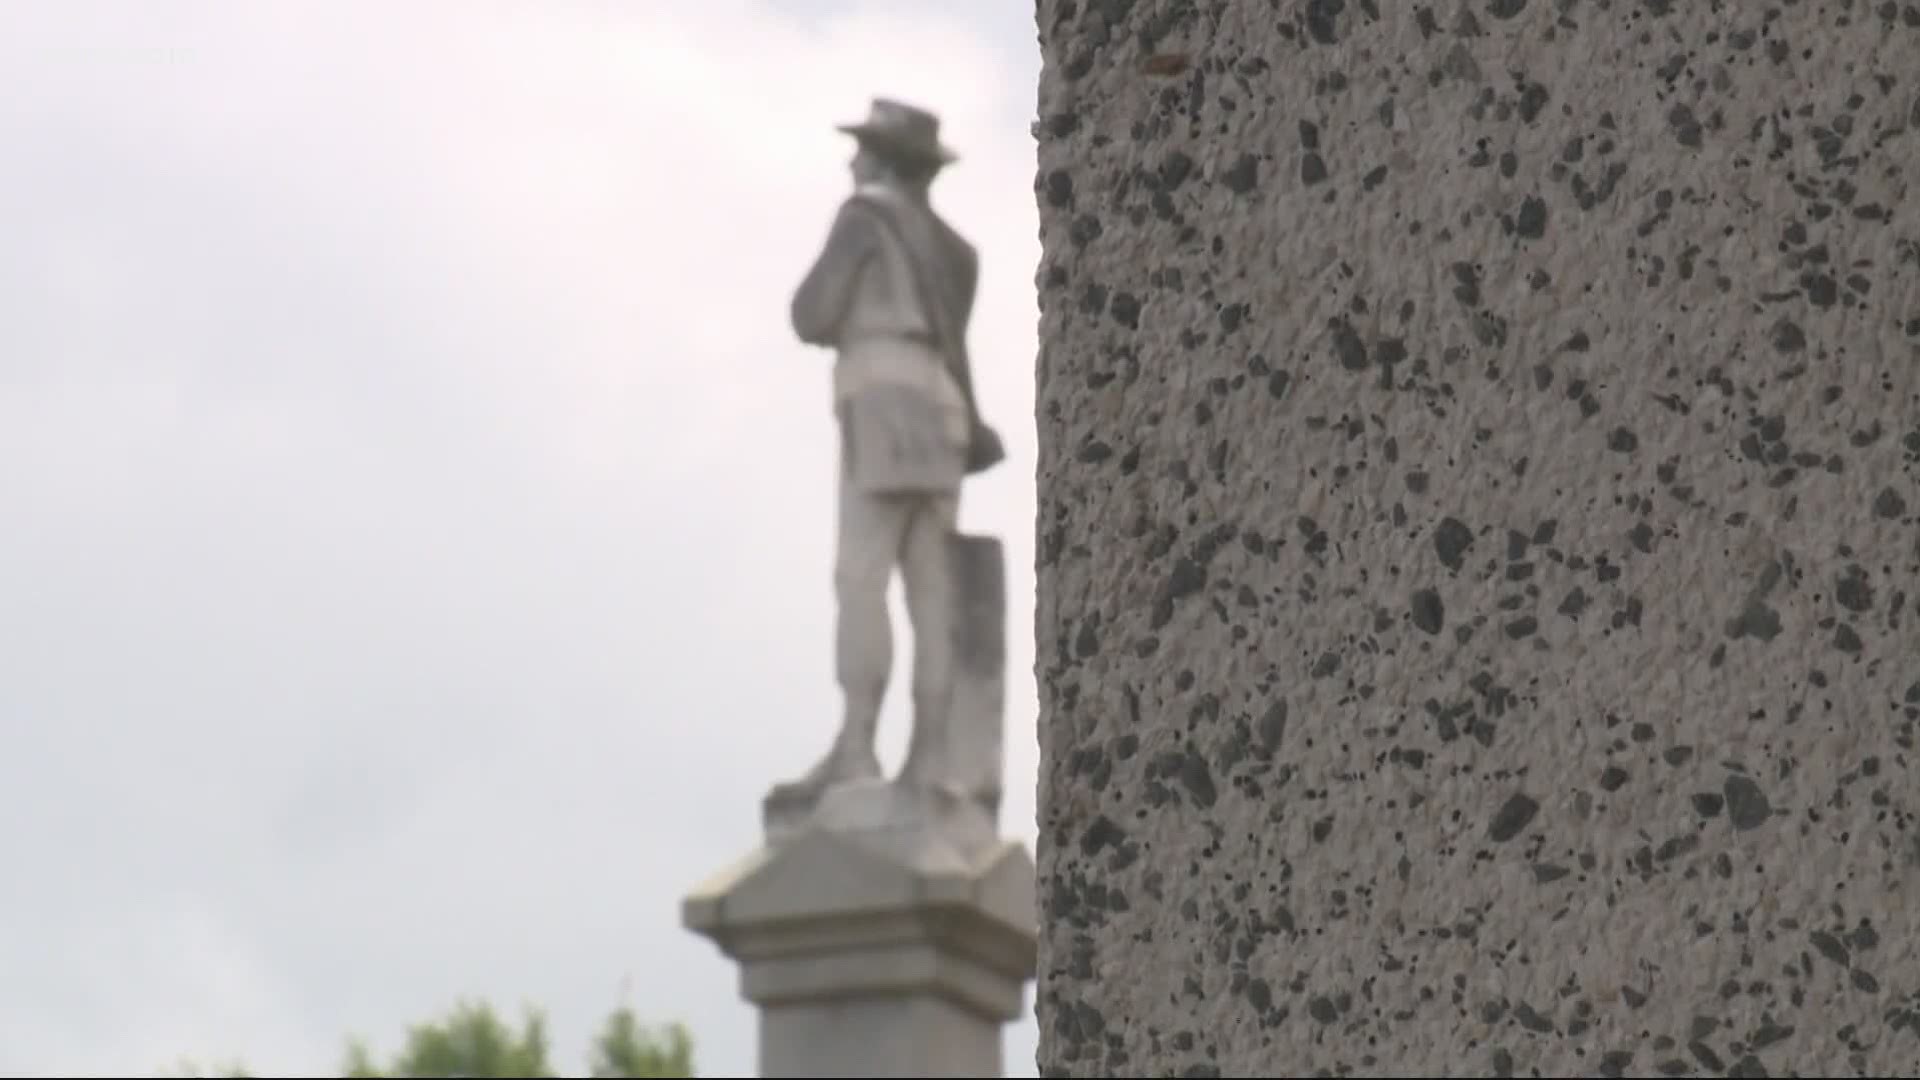 County commissioners originally agreed to pay for its removal and give the monument to the Sons of Confederate Veterans. Now, plans have come to a halt.